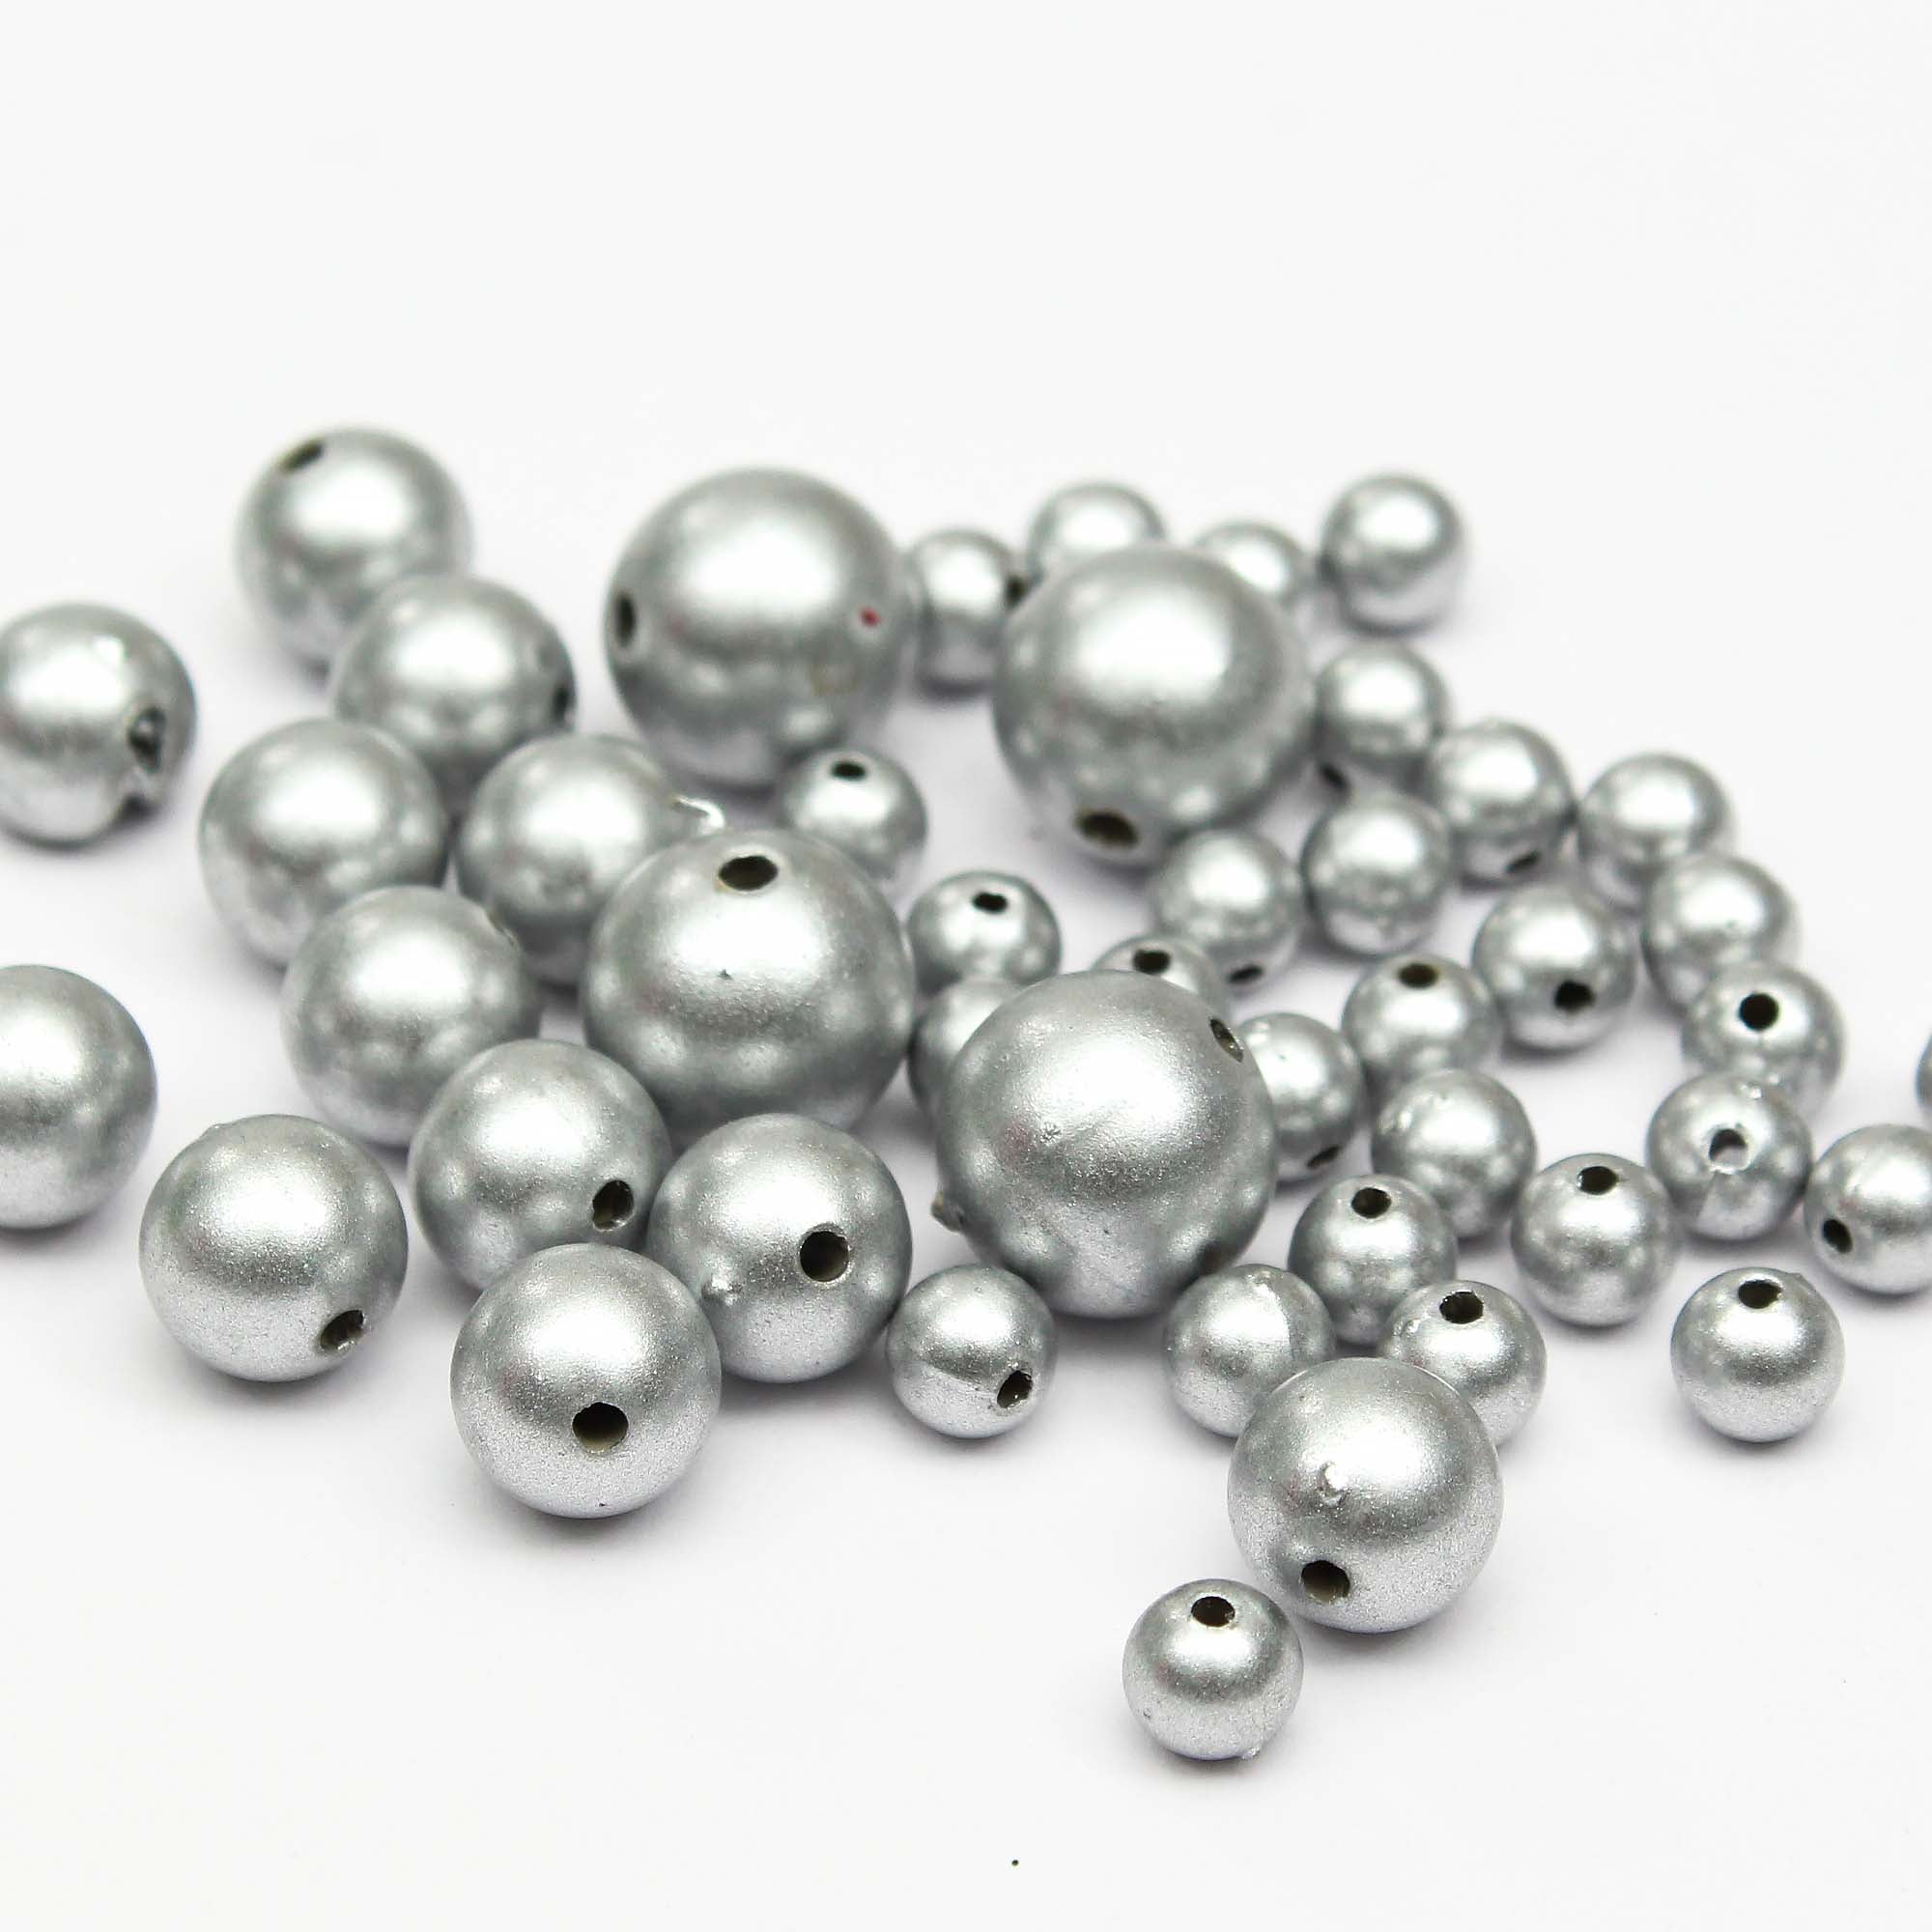 Christmas Elements - Silver Pearl Beads, Assorted Size -10mm,12mm, 30g